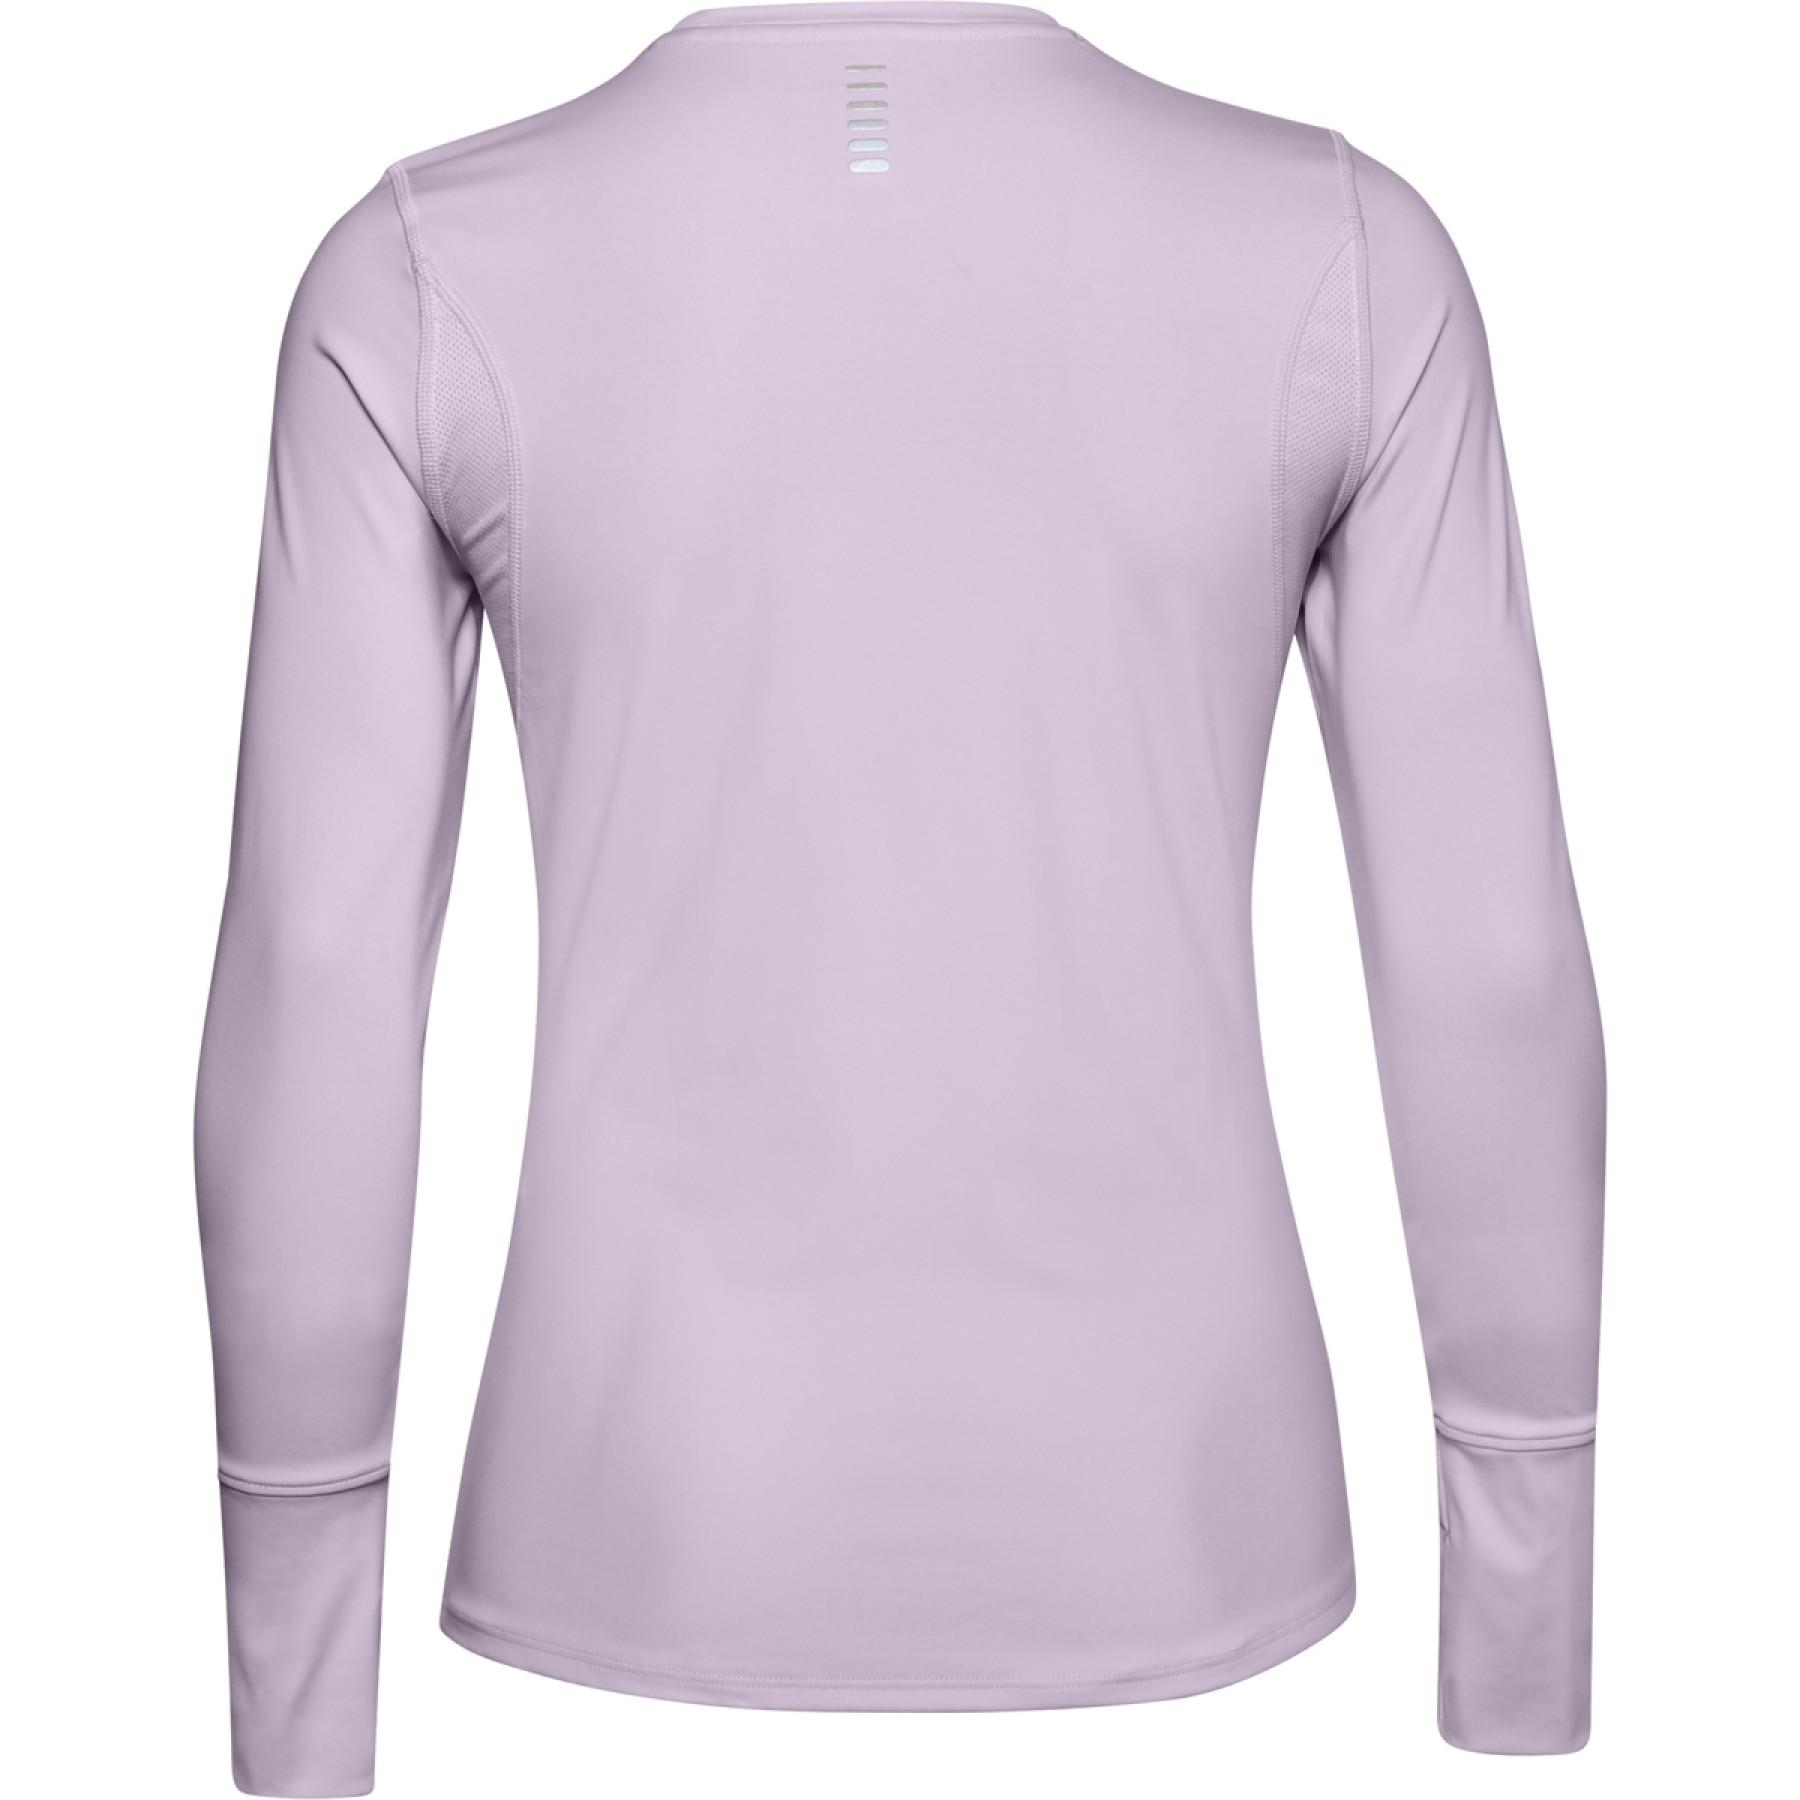 Maillot femme Under Armour à manches longues Empowered Crew